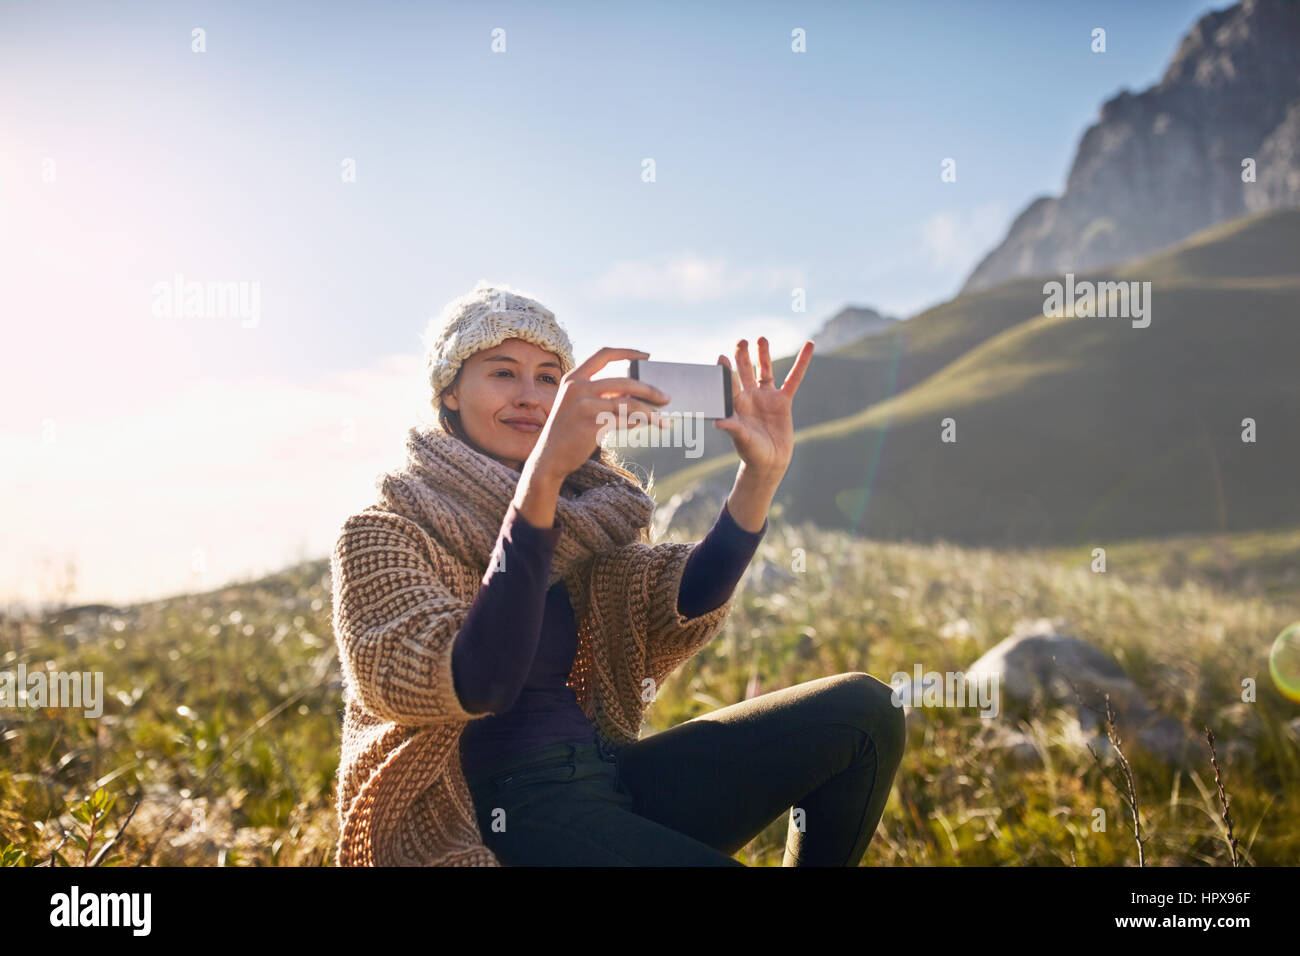 Young woman using camera phone in sunny, remote valley Stock Photo